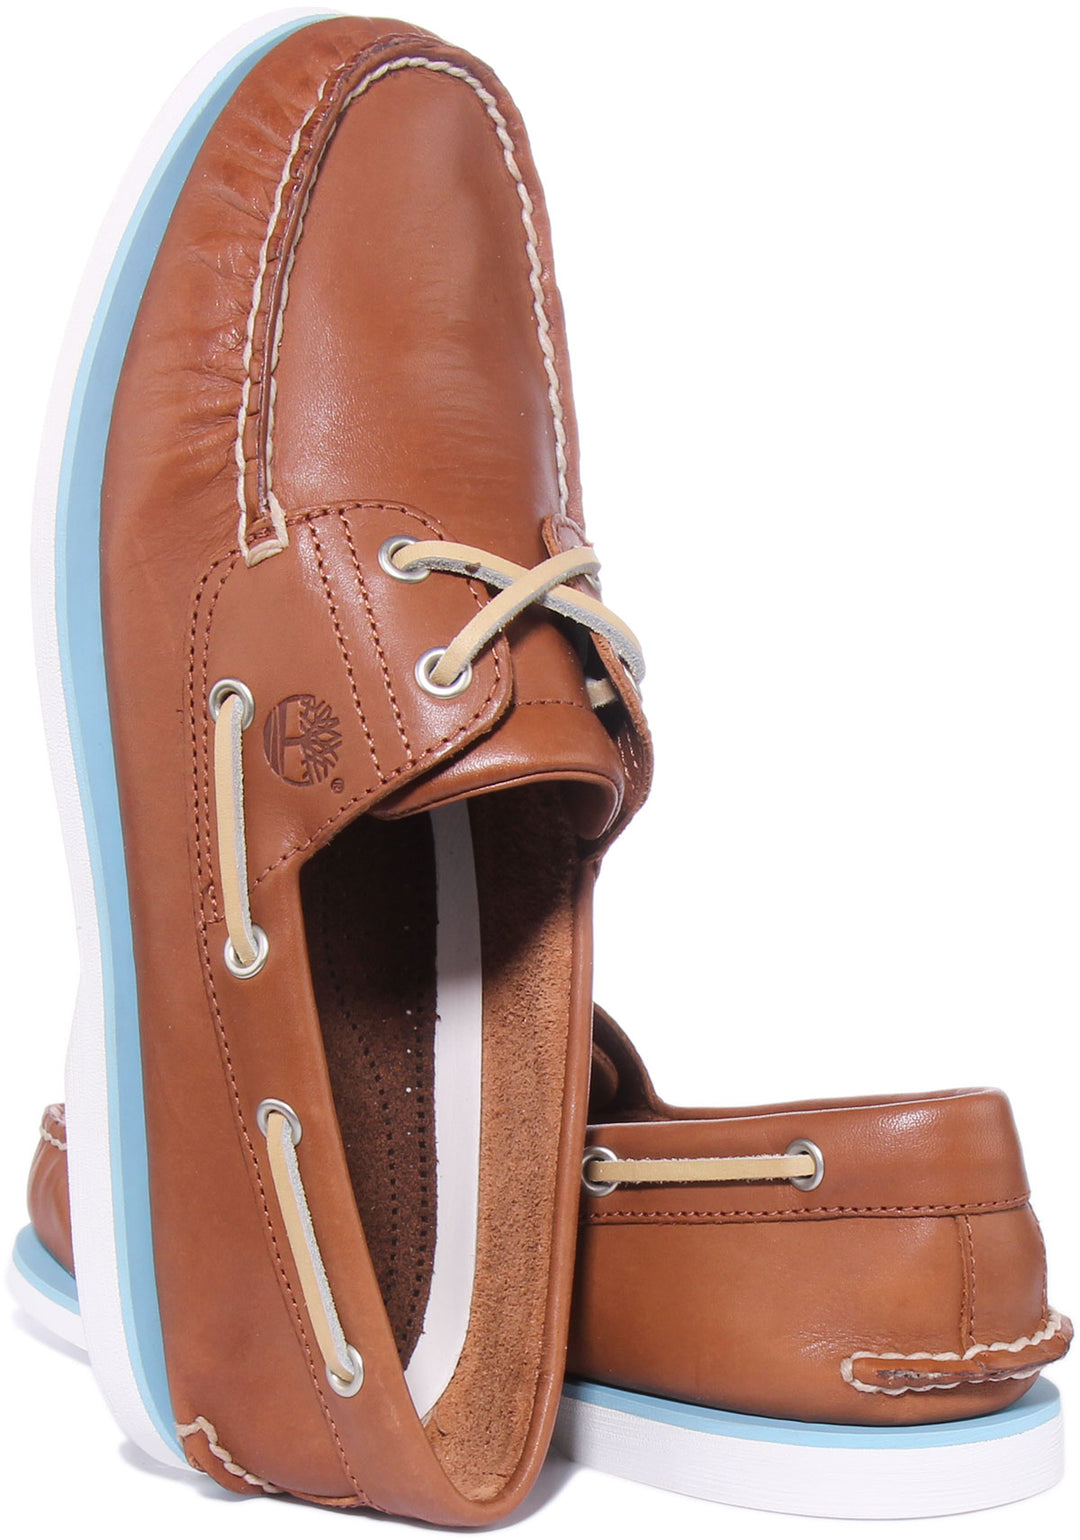 Timberland A2Ghw In Tan For Men